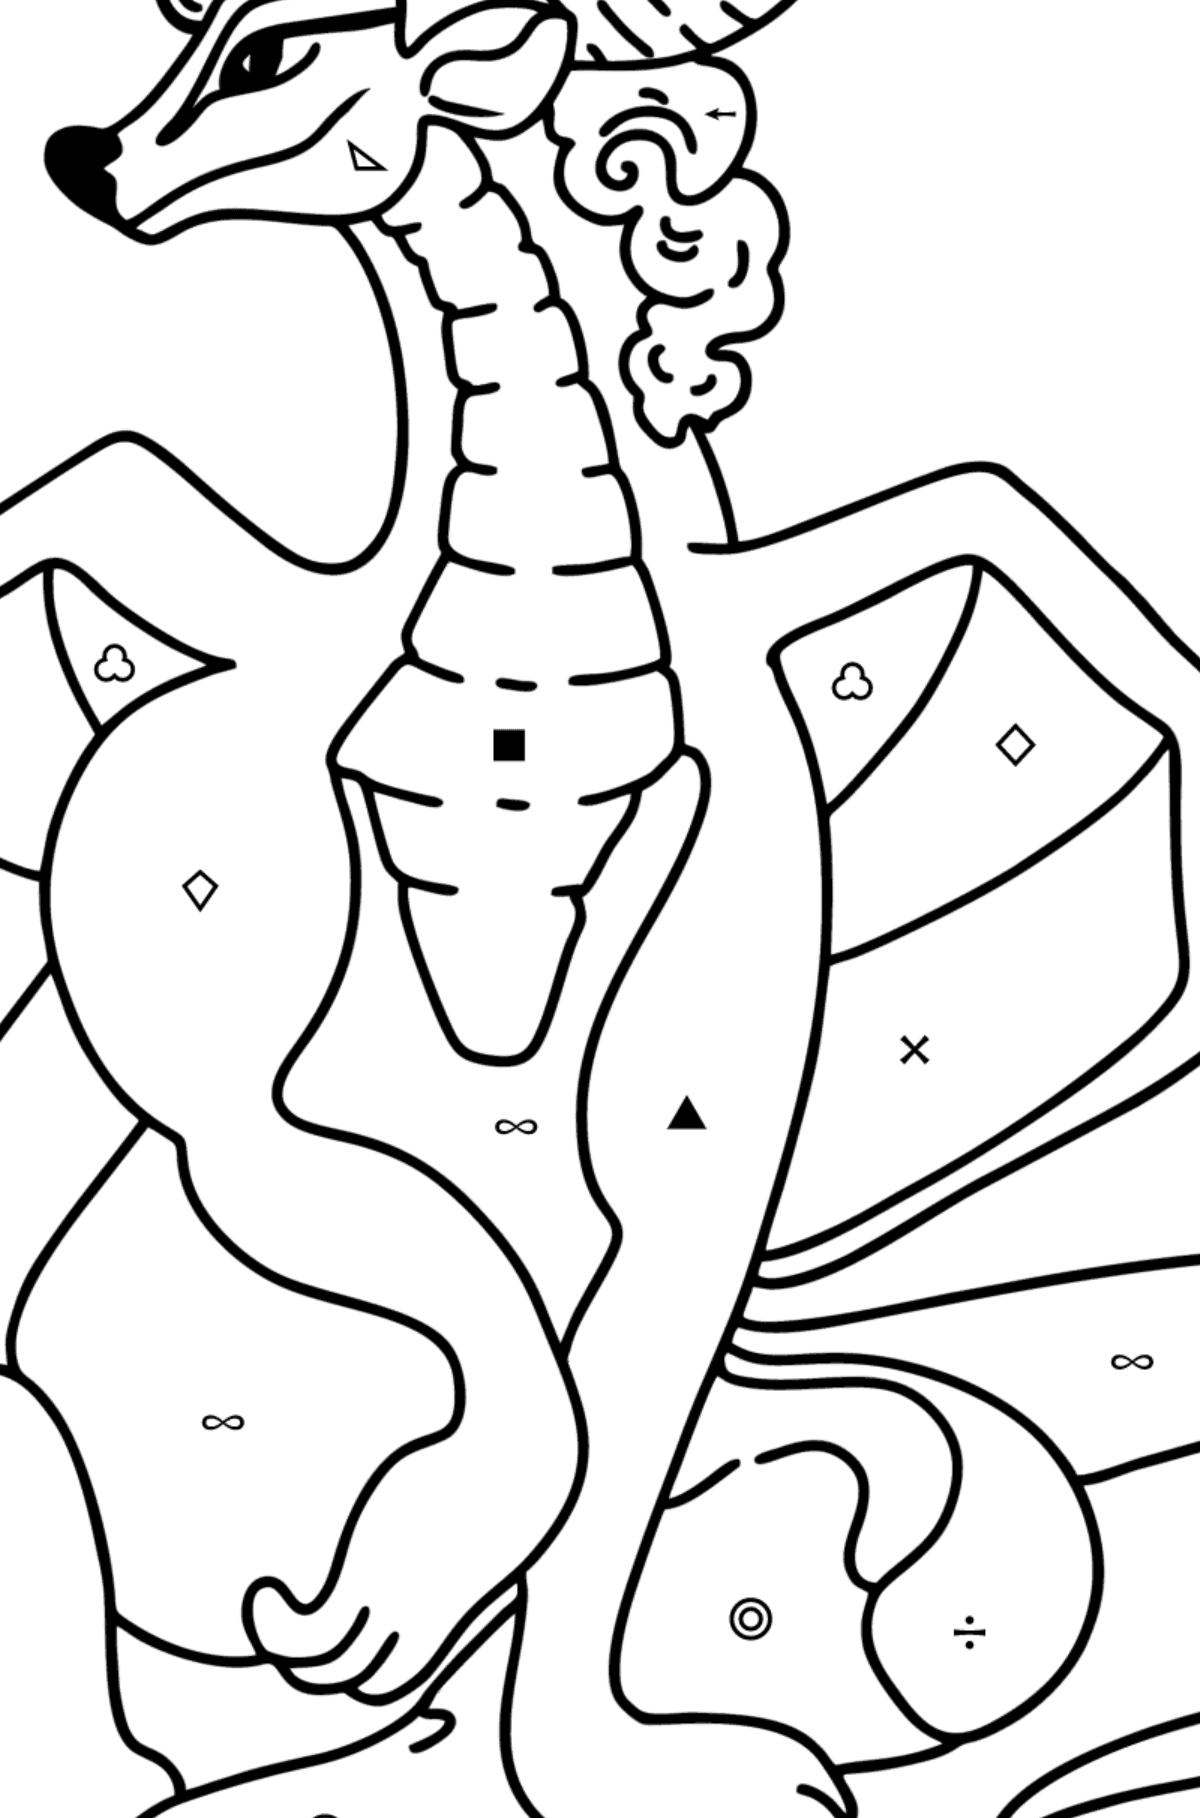 Happy Dragon coloring page - Coloring by Symbols and Geometric Shapes for Kids